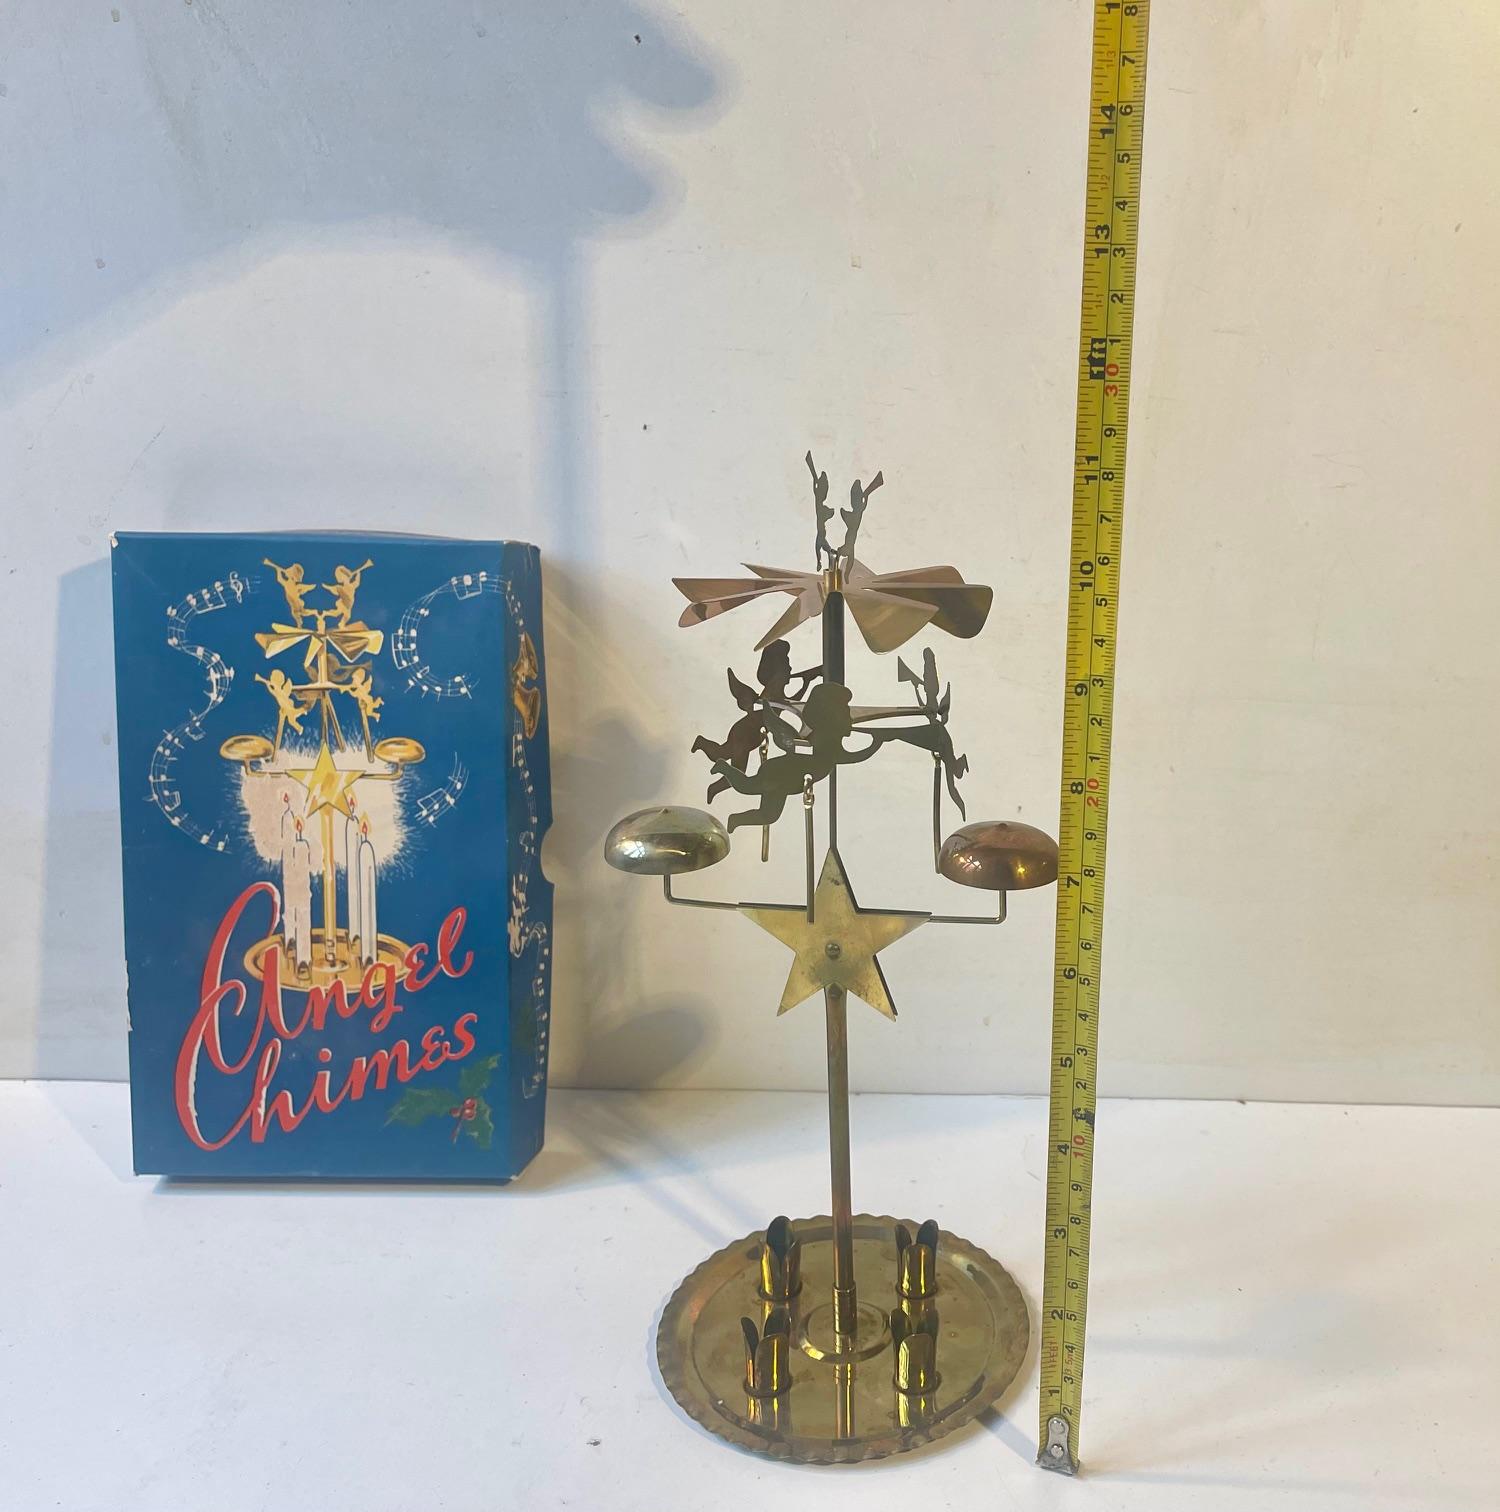 This vintage MEKA No. 274 set of angel chimes was made in Denmark during the 1950s or 60s. The assembled brass parts rotate on a socket with 4 candles providing the heat for convection to spin the rotor. It comes in its original paper box from Meka